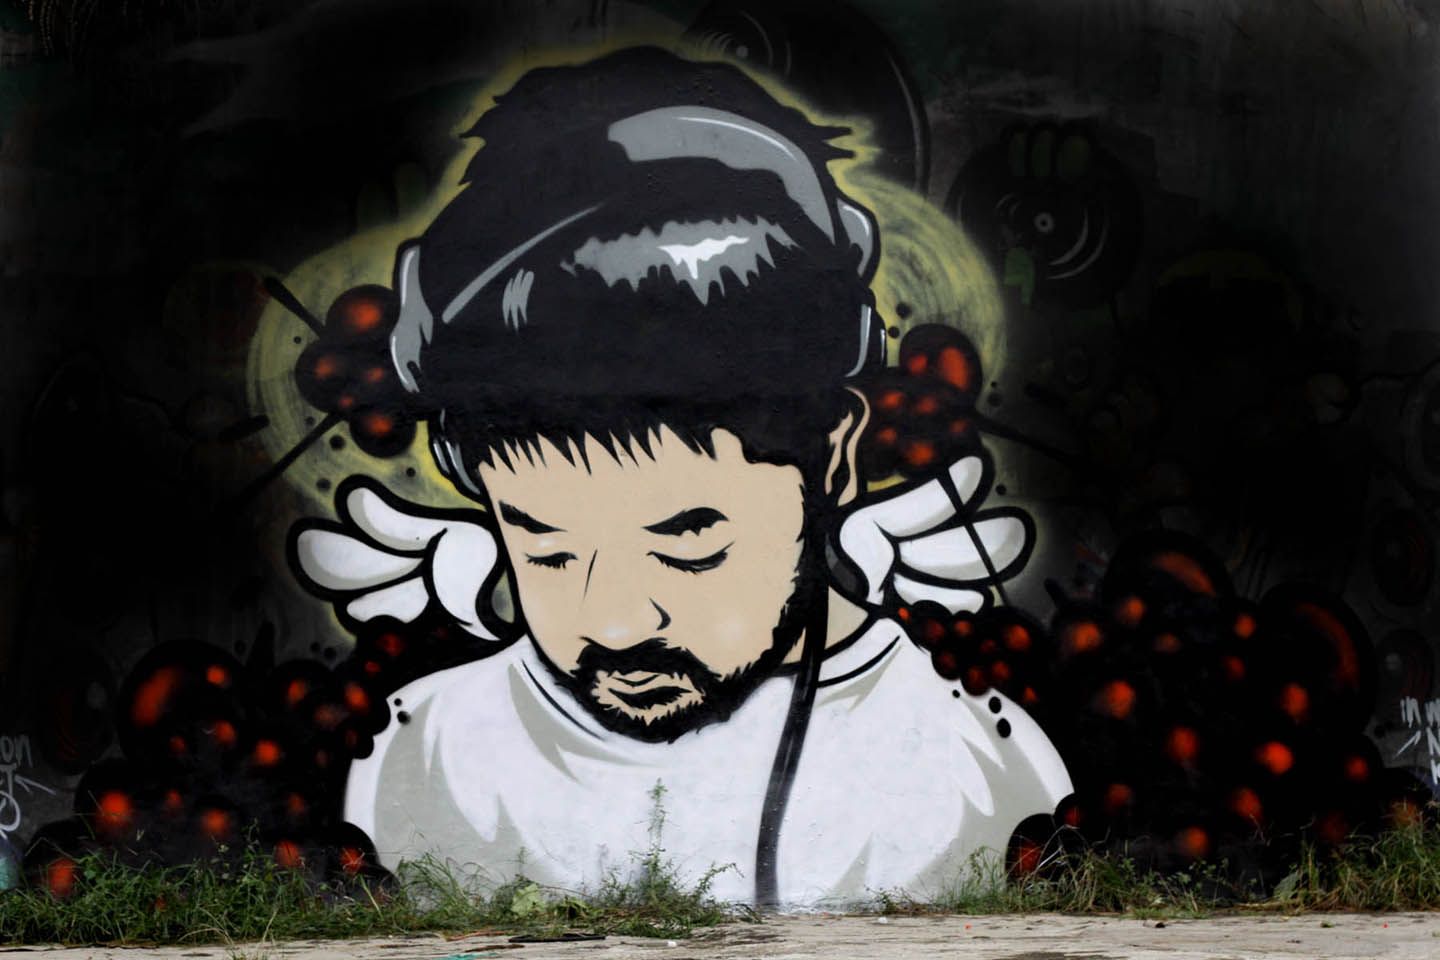 Nujabes - Wallpaper